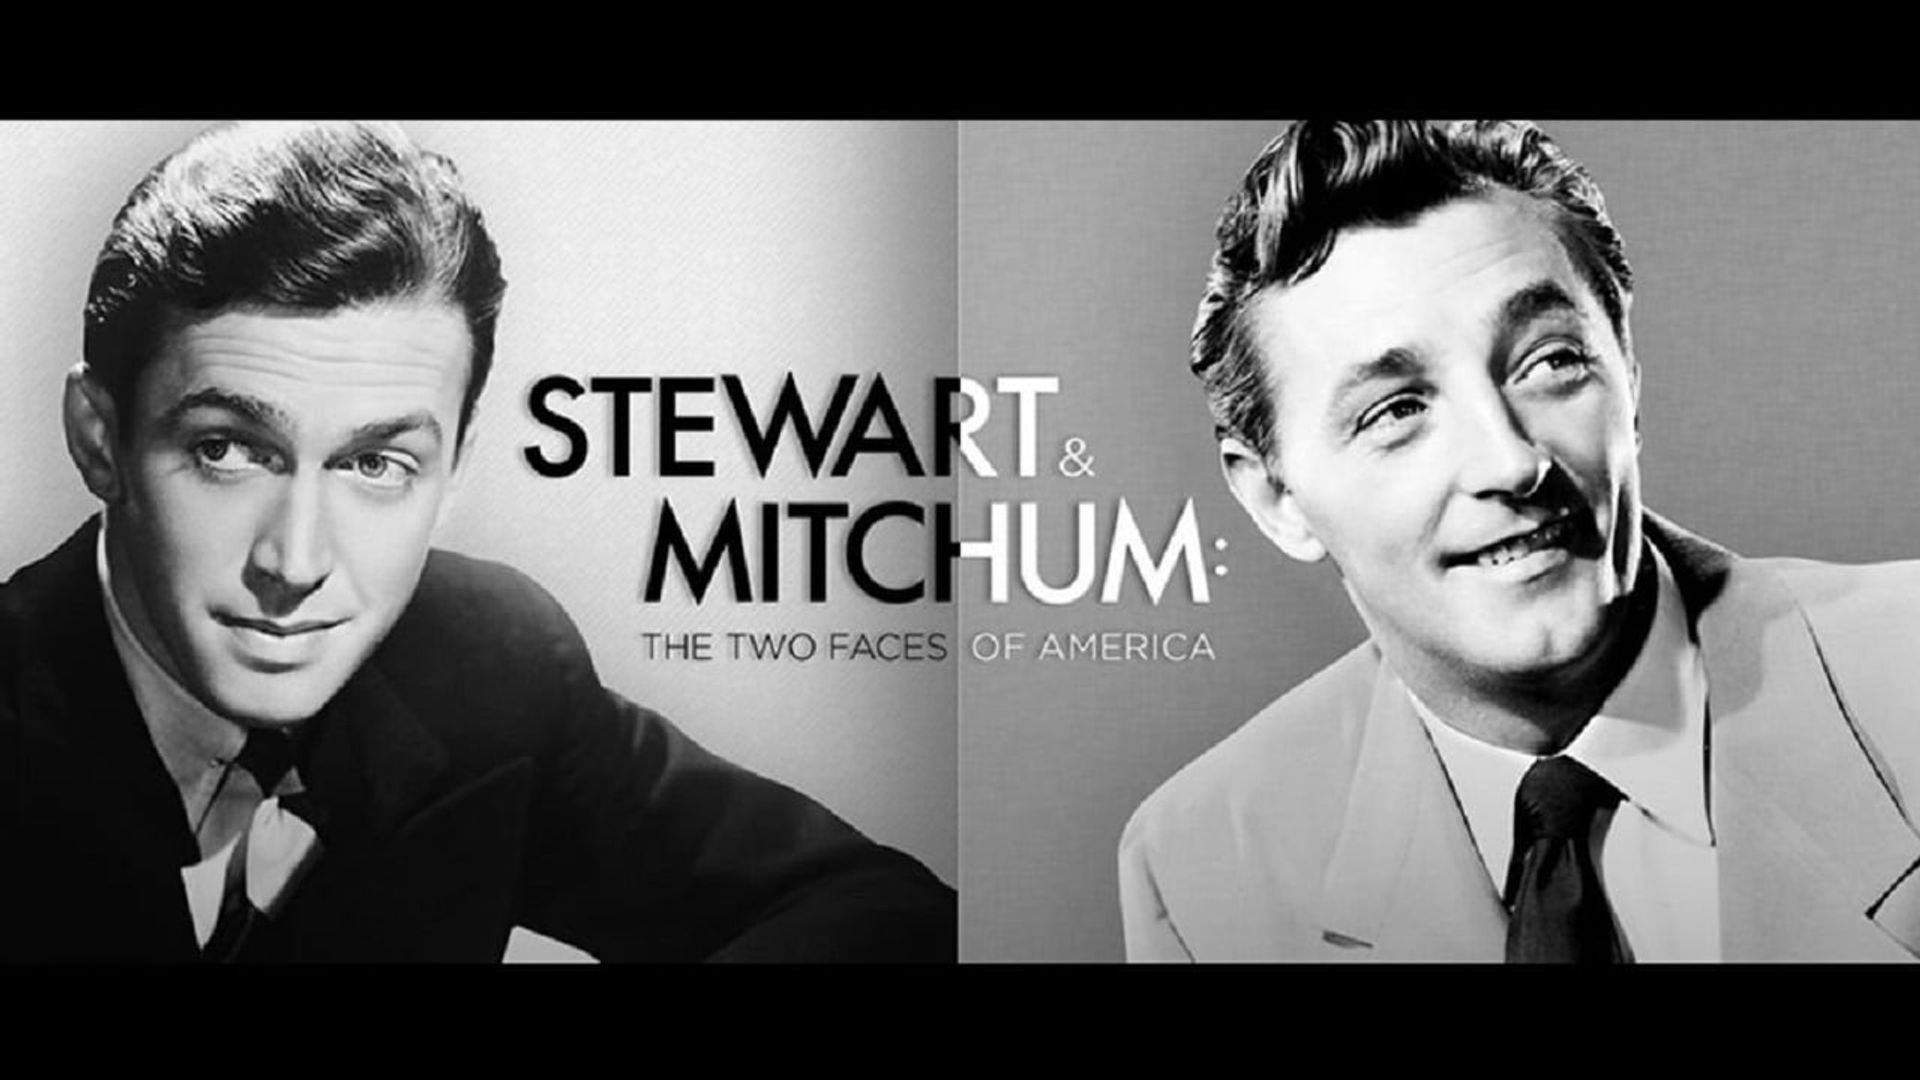 James Stewart, Robert Mitchum: The Two Faces of America background